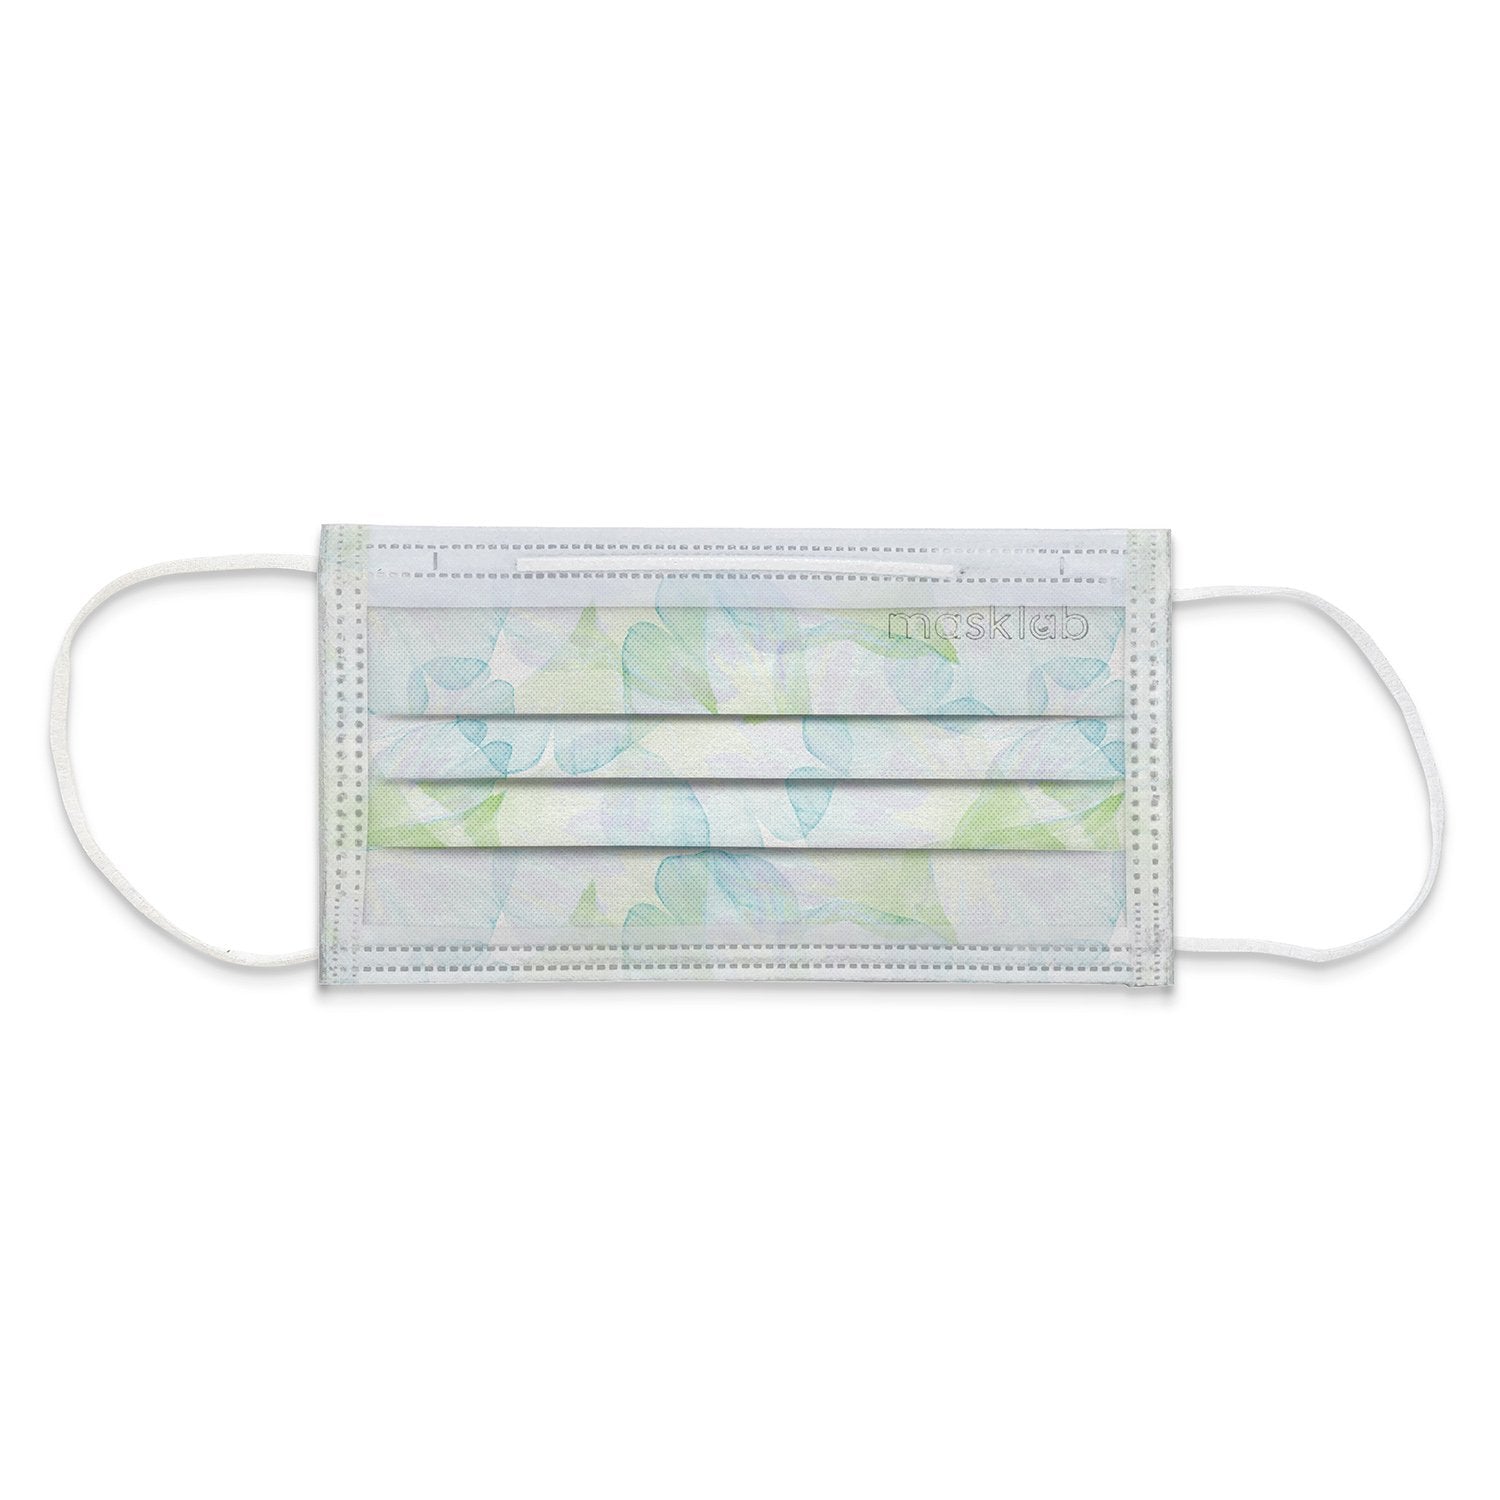 masklab™ Lotus Petals Adult 3-ply Surgical Mask (Box of 10, Individually-wrapped)